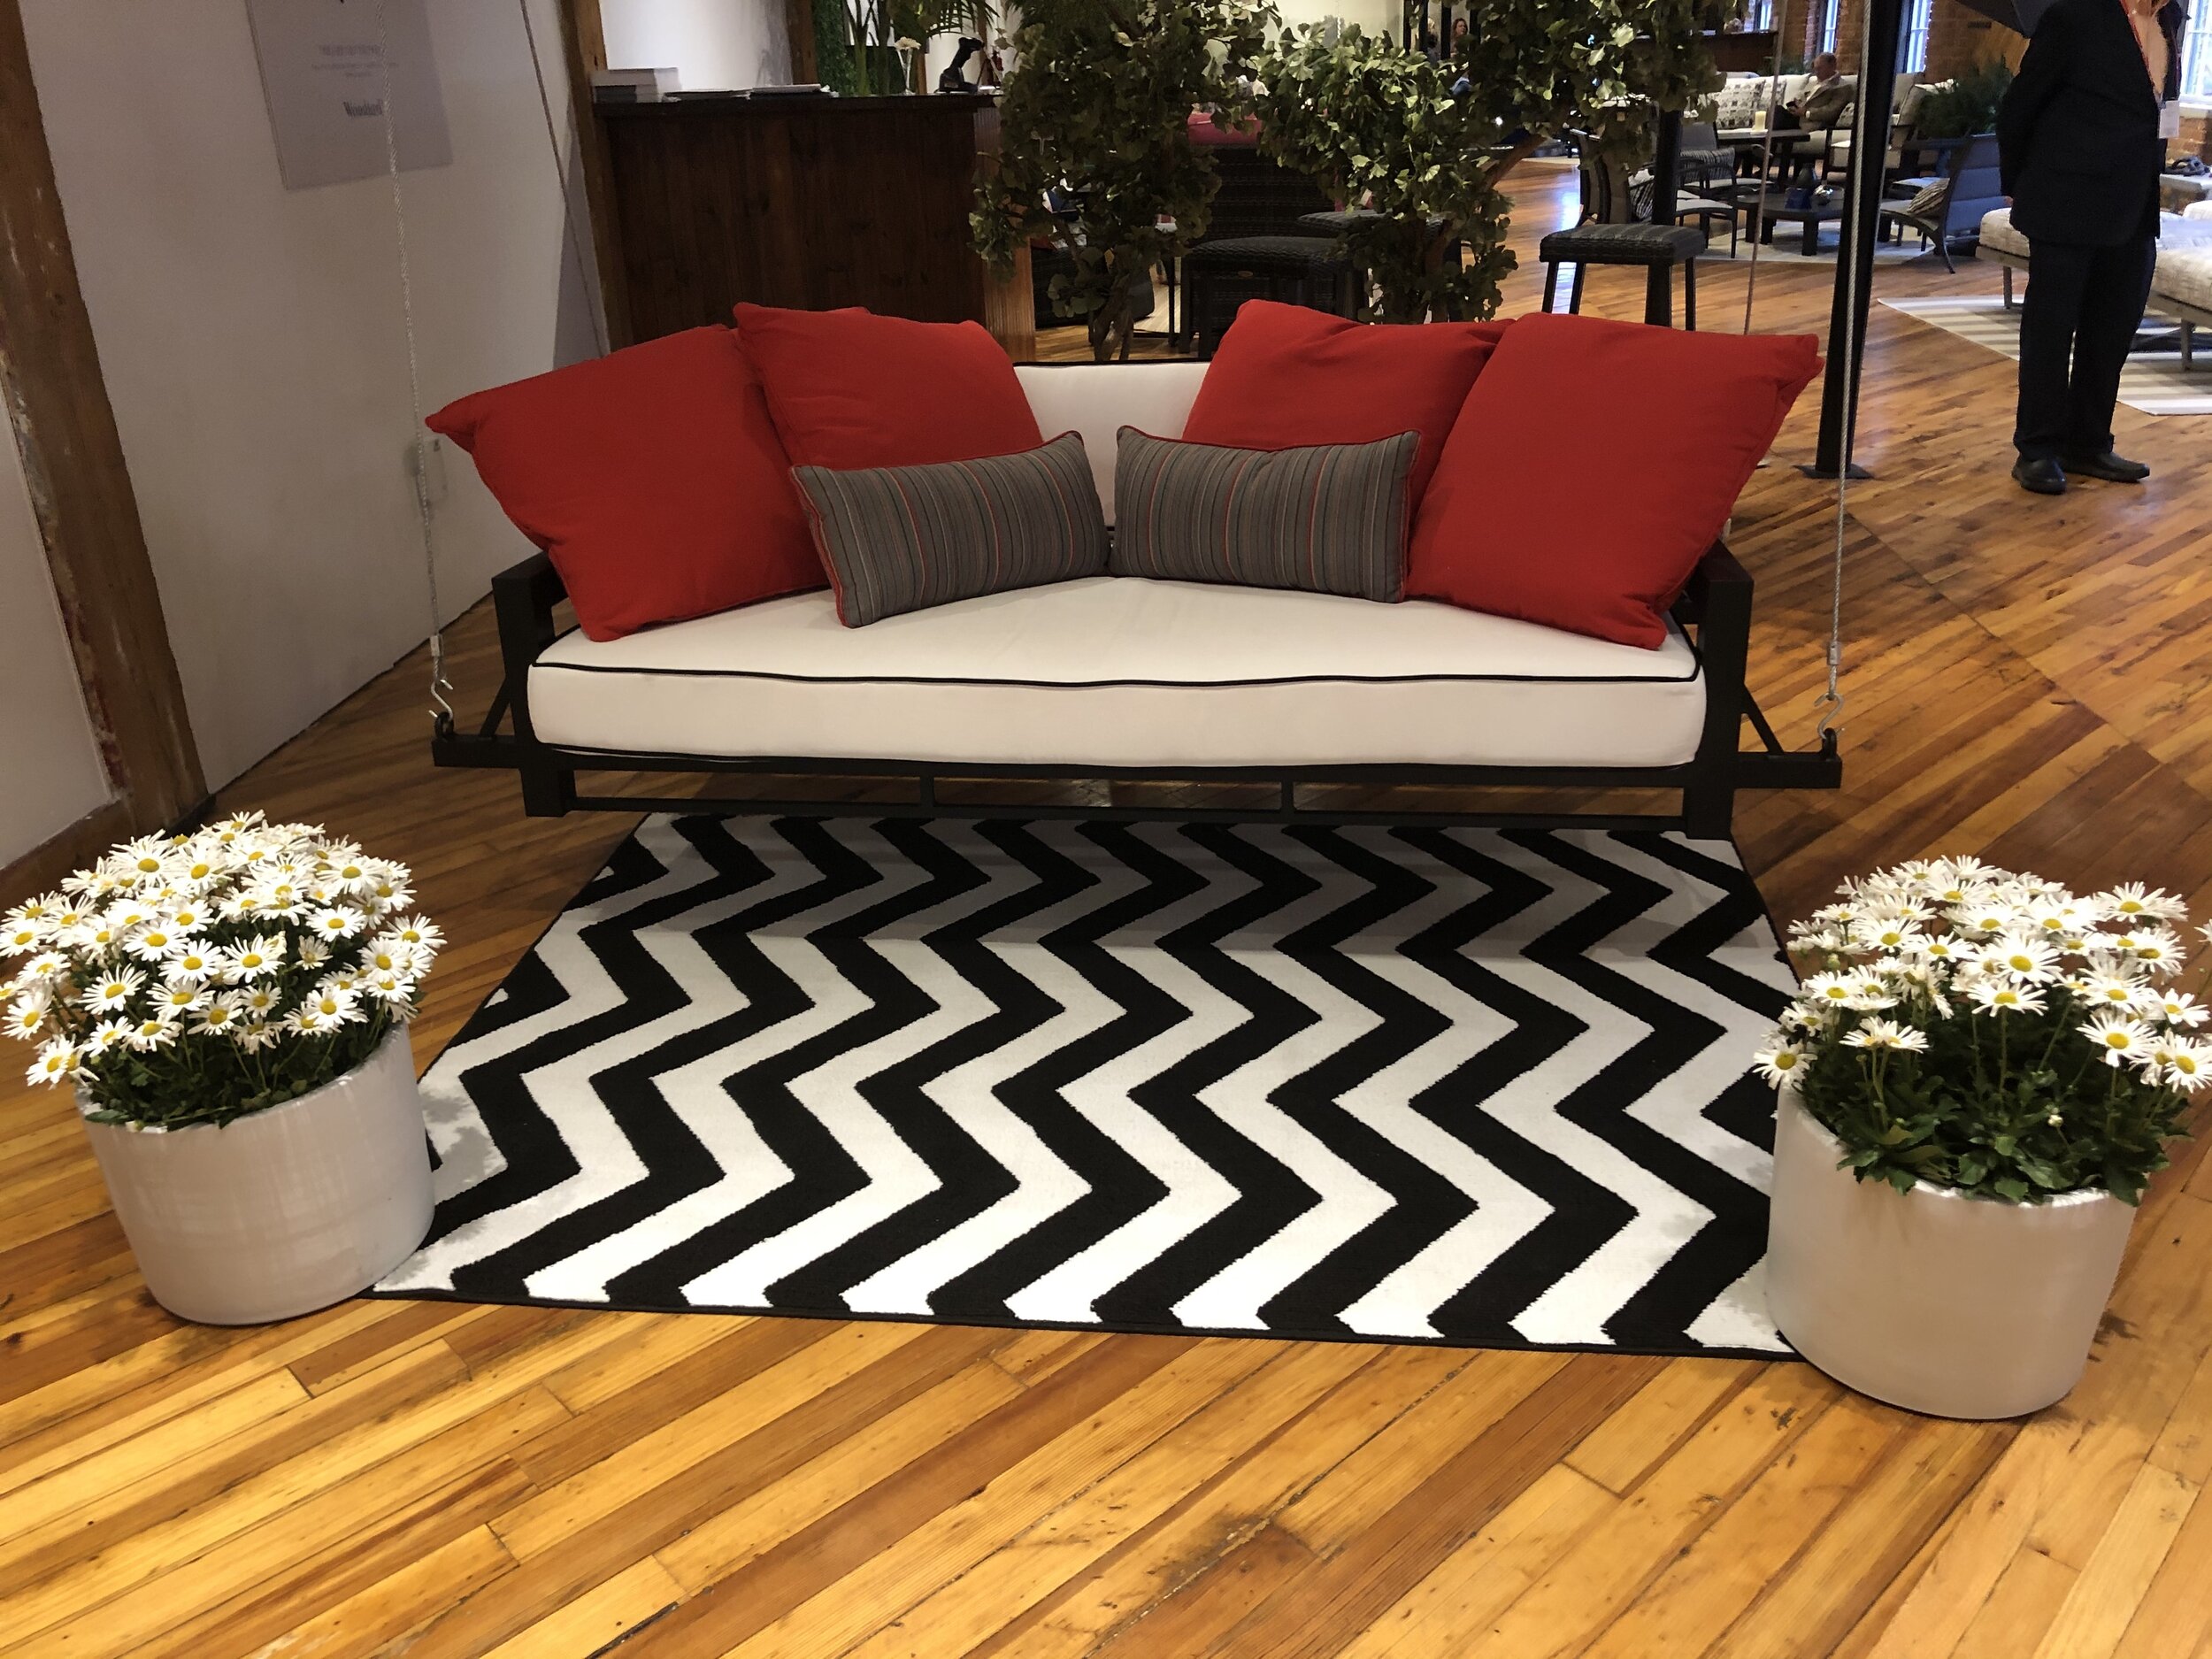 Woodard’s Soho daybed swing comes in an array of fabric choices.